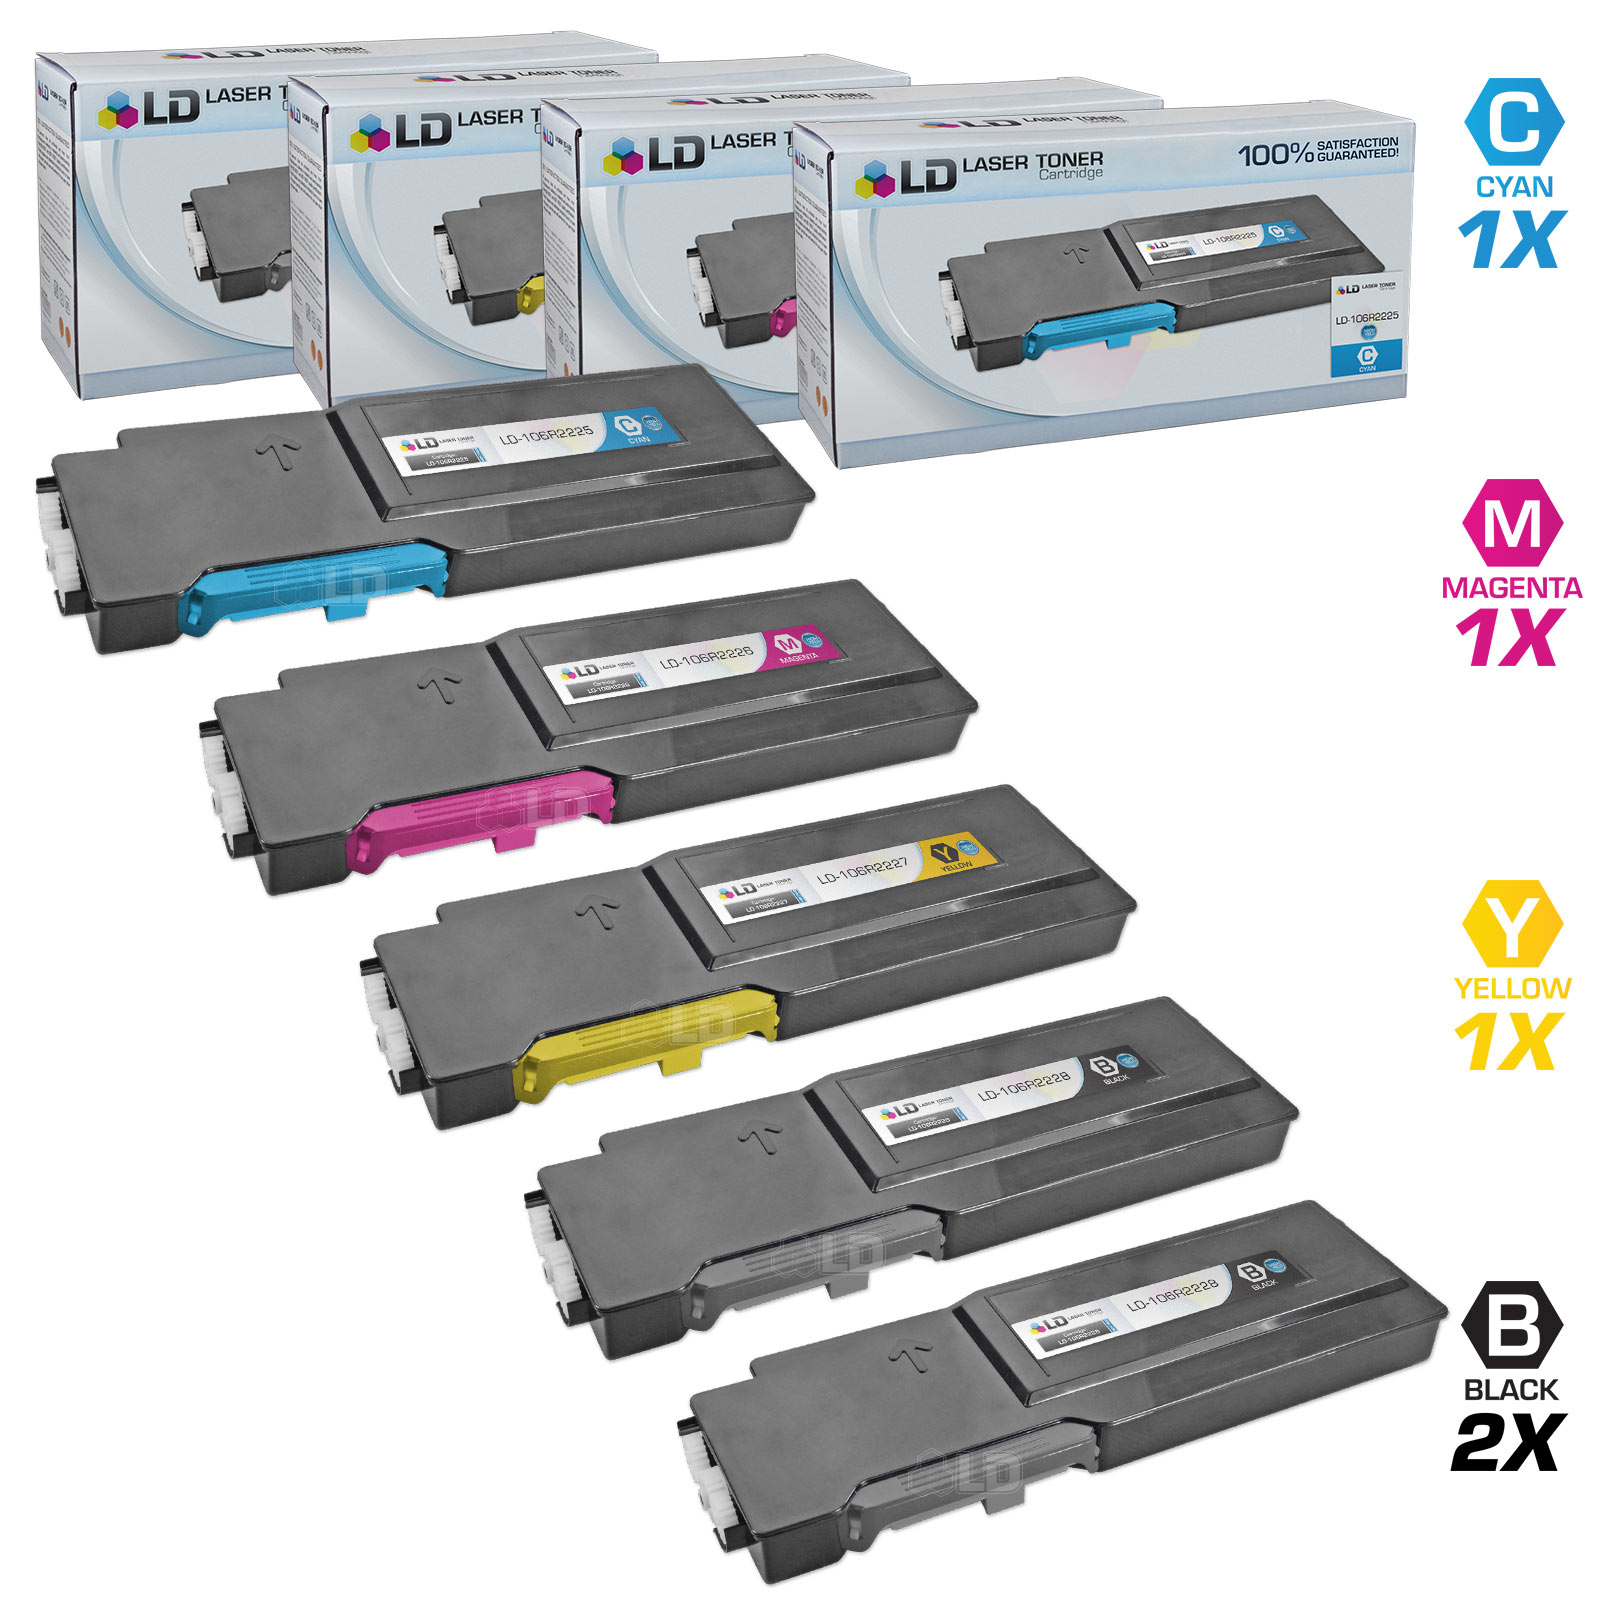 LD Compatible Replacement for Xerox Phaser 6600 / WorkCentre 6605 High Capacity Toner Cartridges: 2 106R02228 Black, 1 106R02225 Cyan, 1 106R02226 Magenta, 1 106R02227 Yellow - image 1 of 7